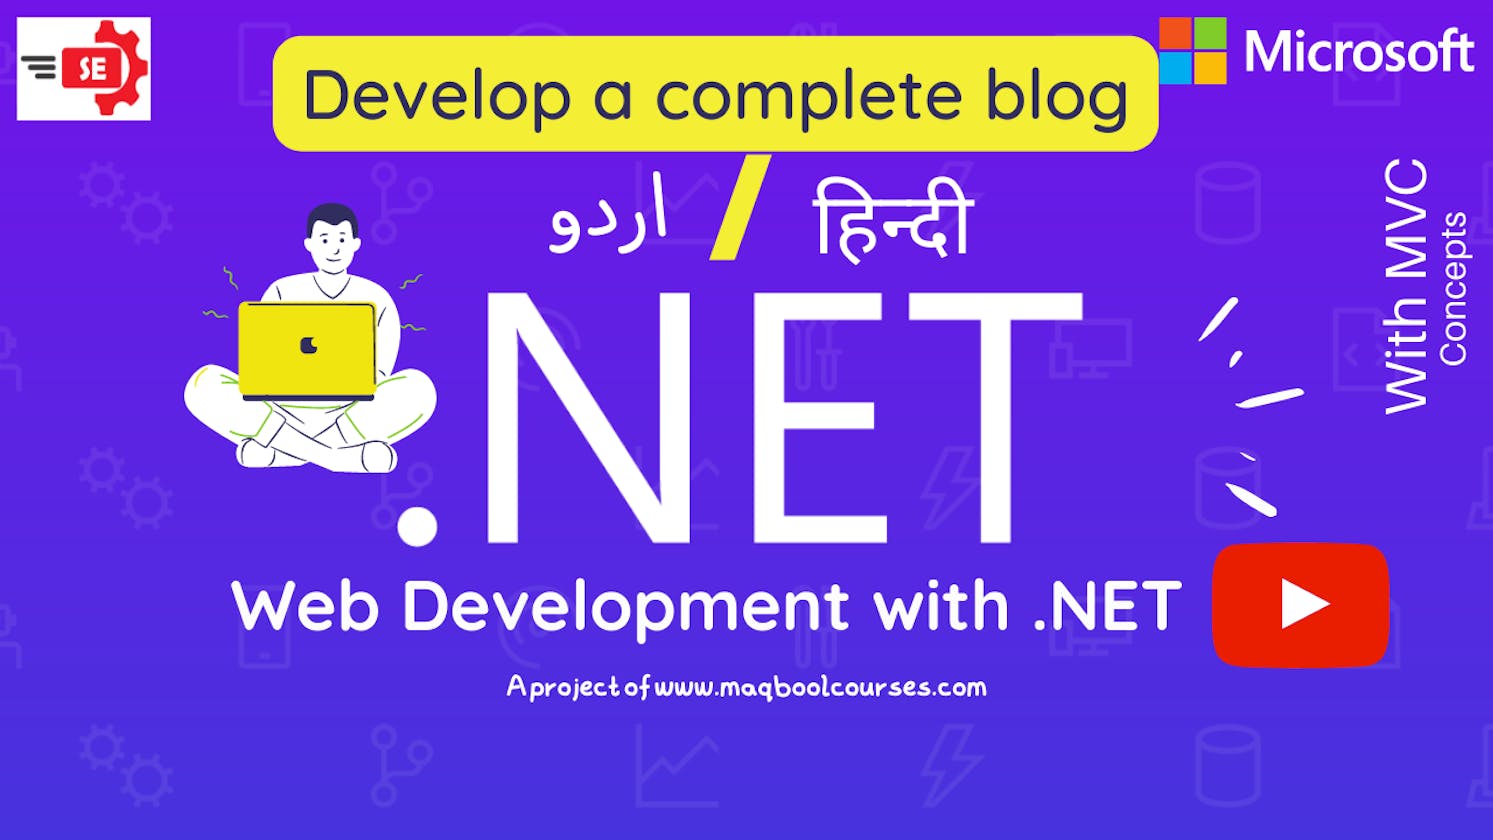 Learn how to develop a blog with C#.NET MVC